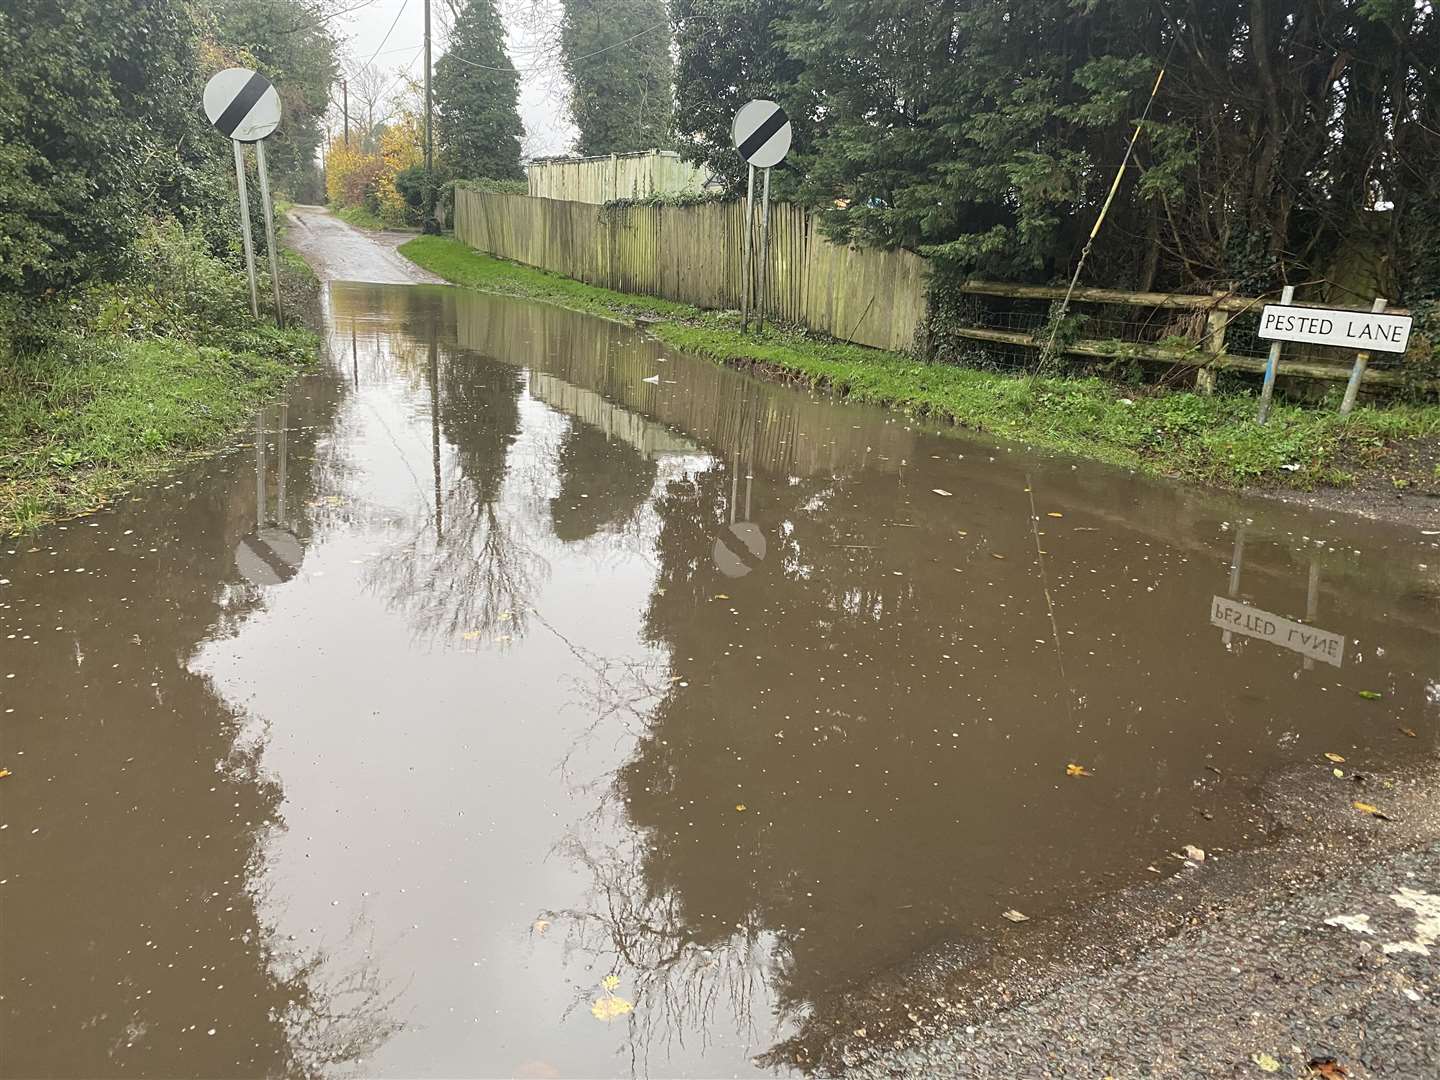 Heavy rain has caused flooding on Pested Lane off the A251 near Challock